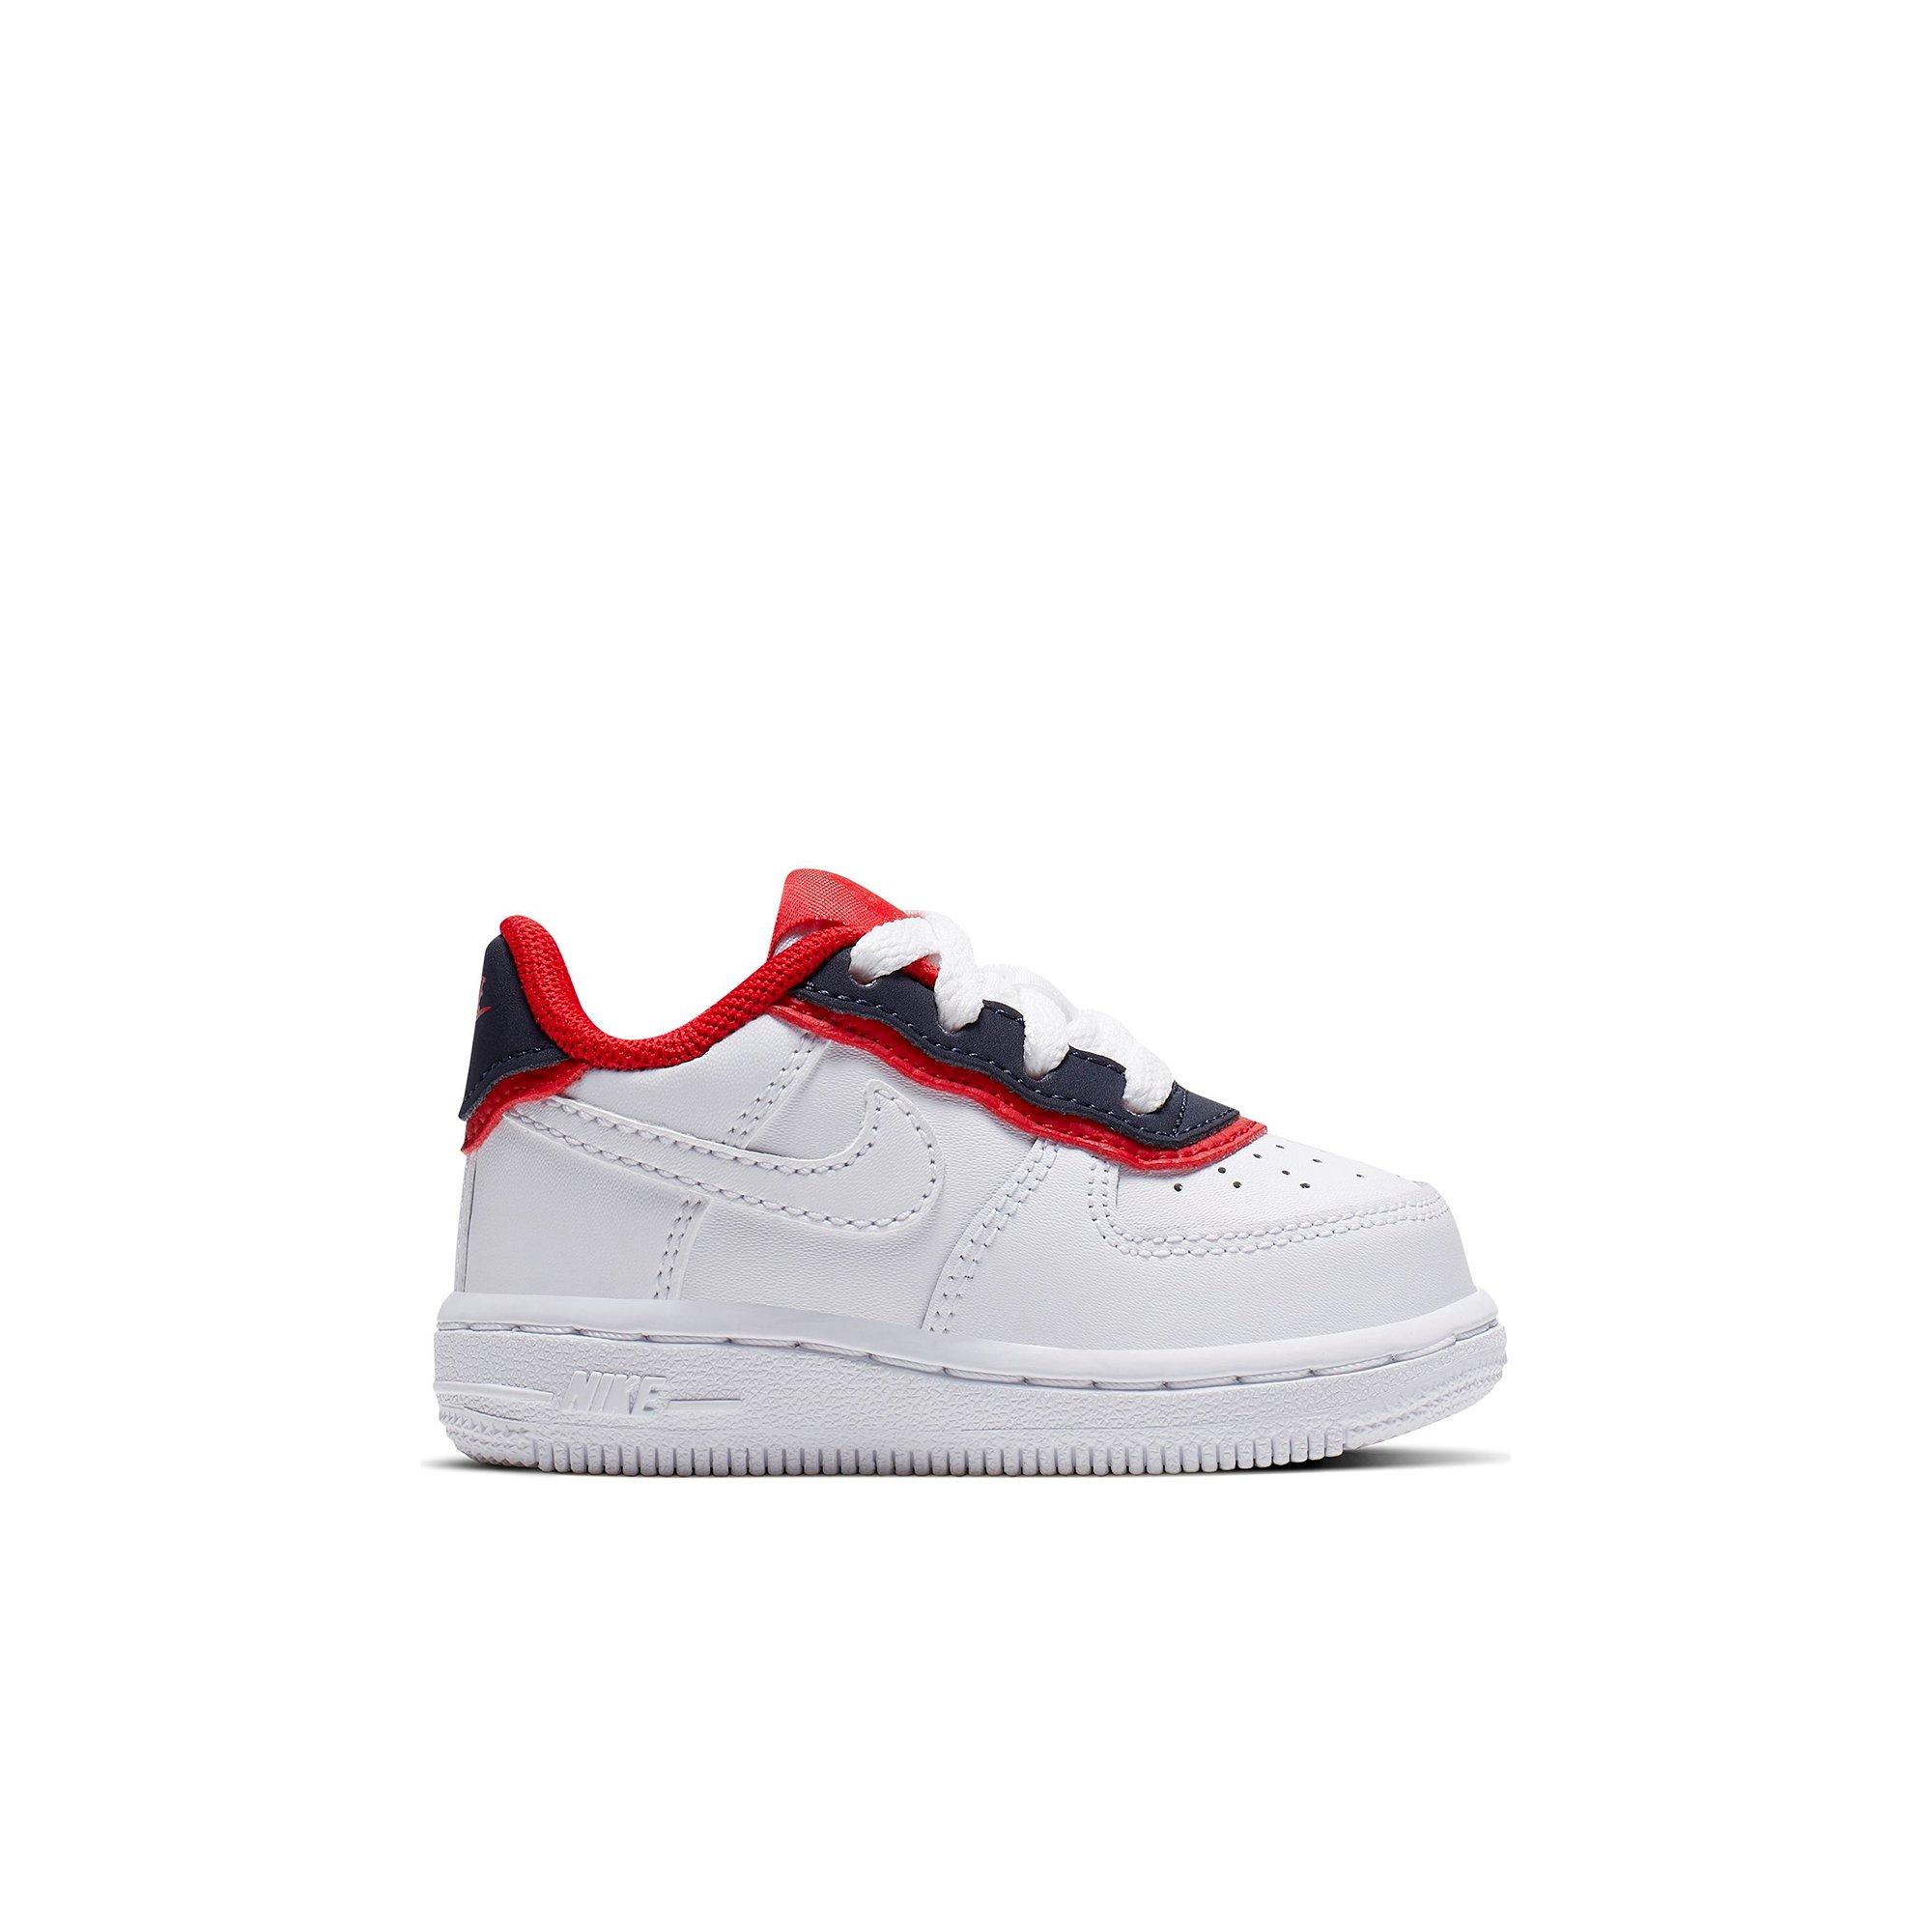 white air forces with red and blue